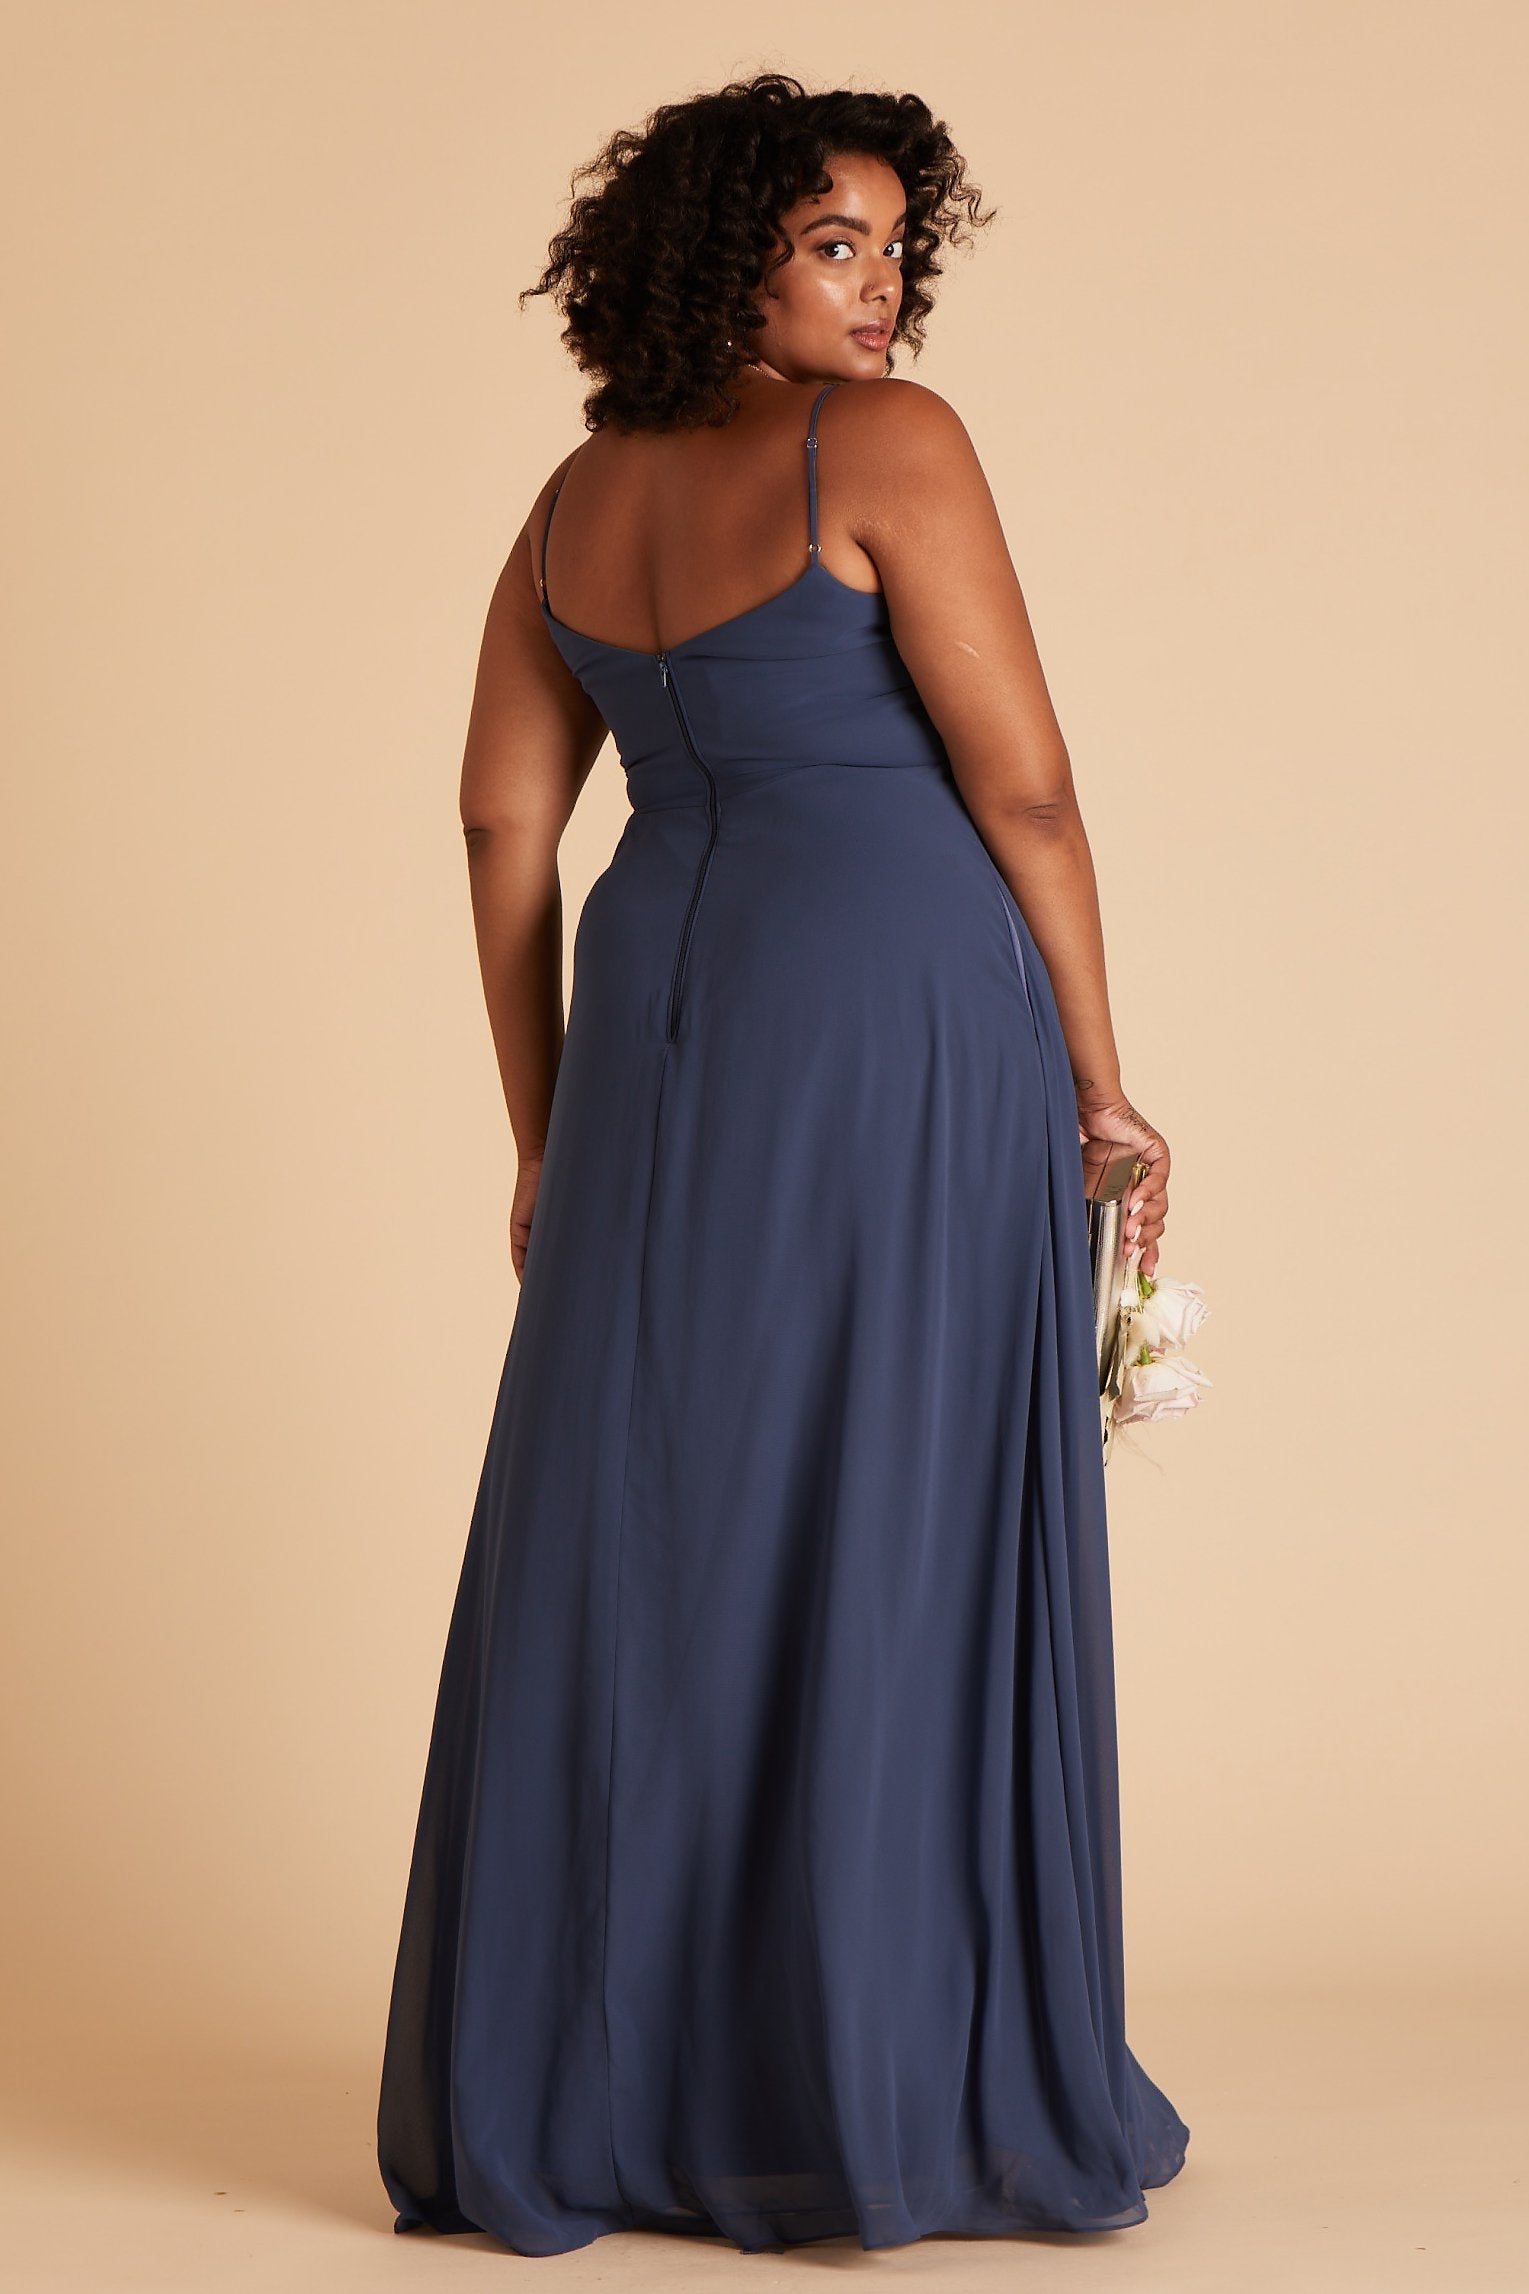 Devin convertible plus size bridesmaids dress in slate blue chiffon by Birdy Grey, back view